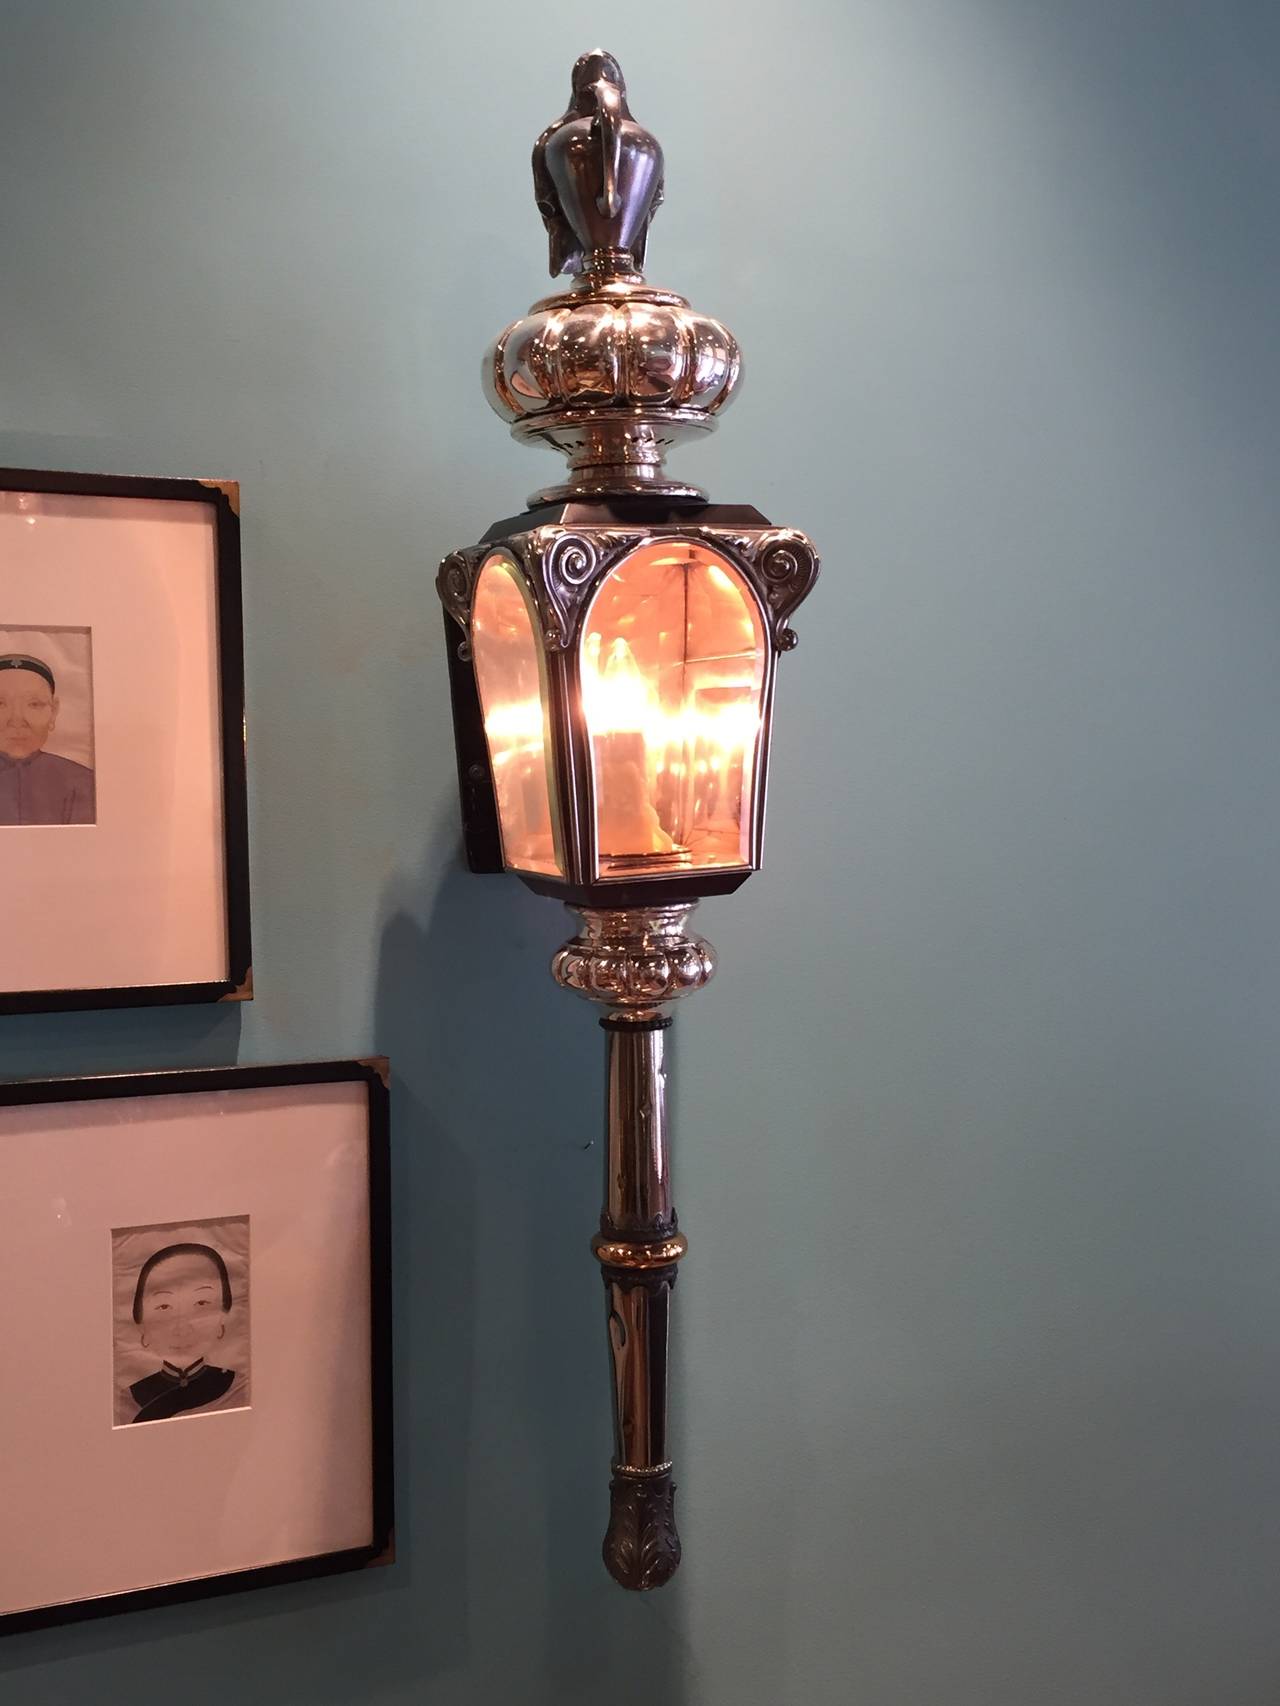 Pair of American coach lamps, circa 1890. Stamped CT. The draped urn on the top suggest they were originally used on a hearse.